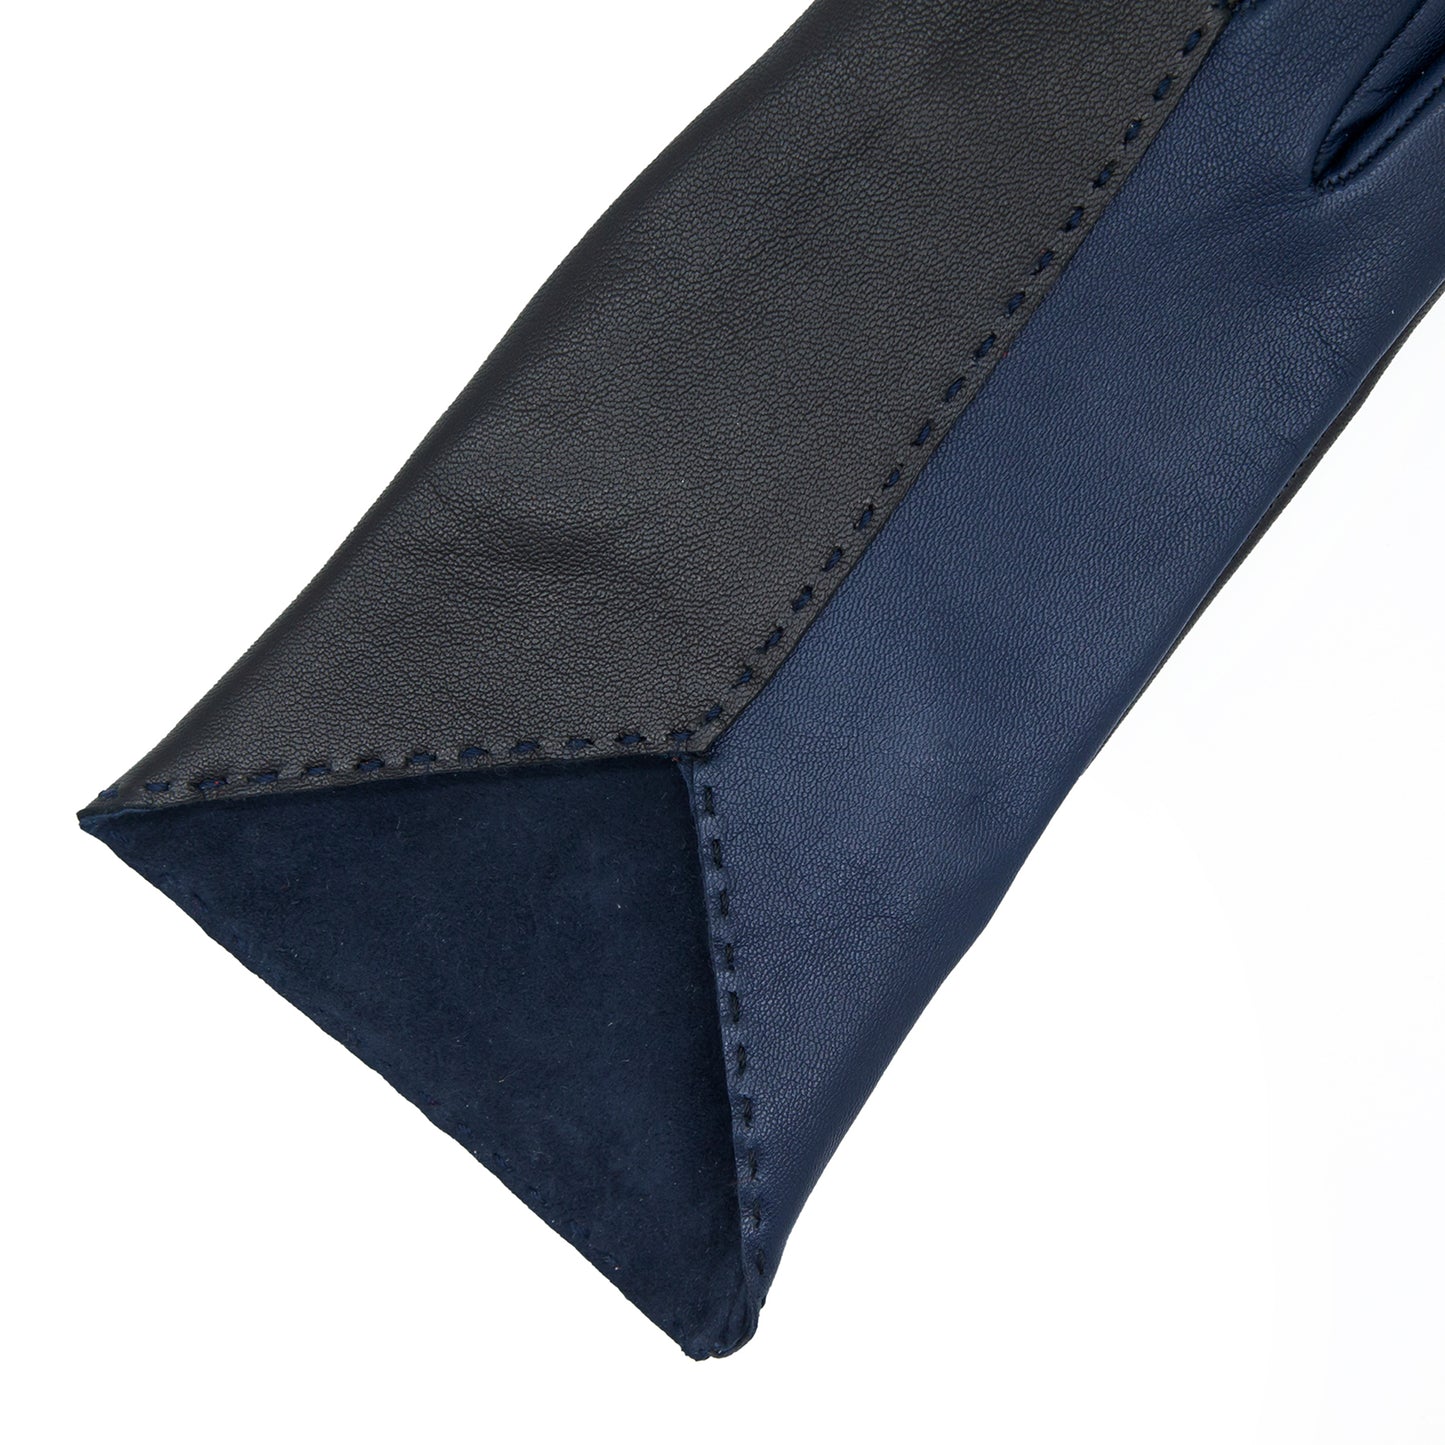 Women's blue and black metal free nappa leather gloves unlined with sustainable cashmere lining